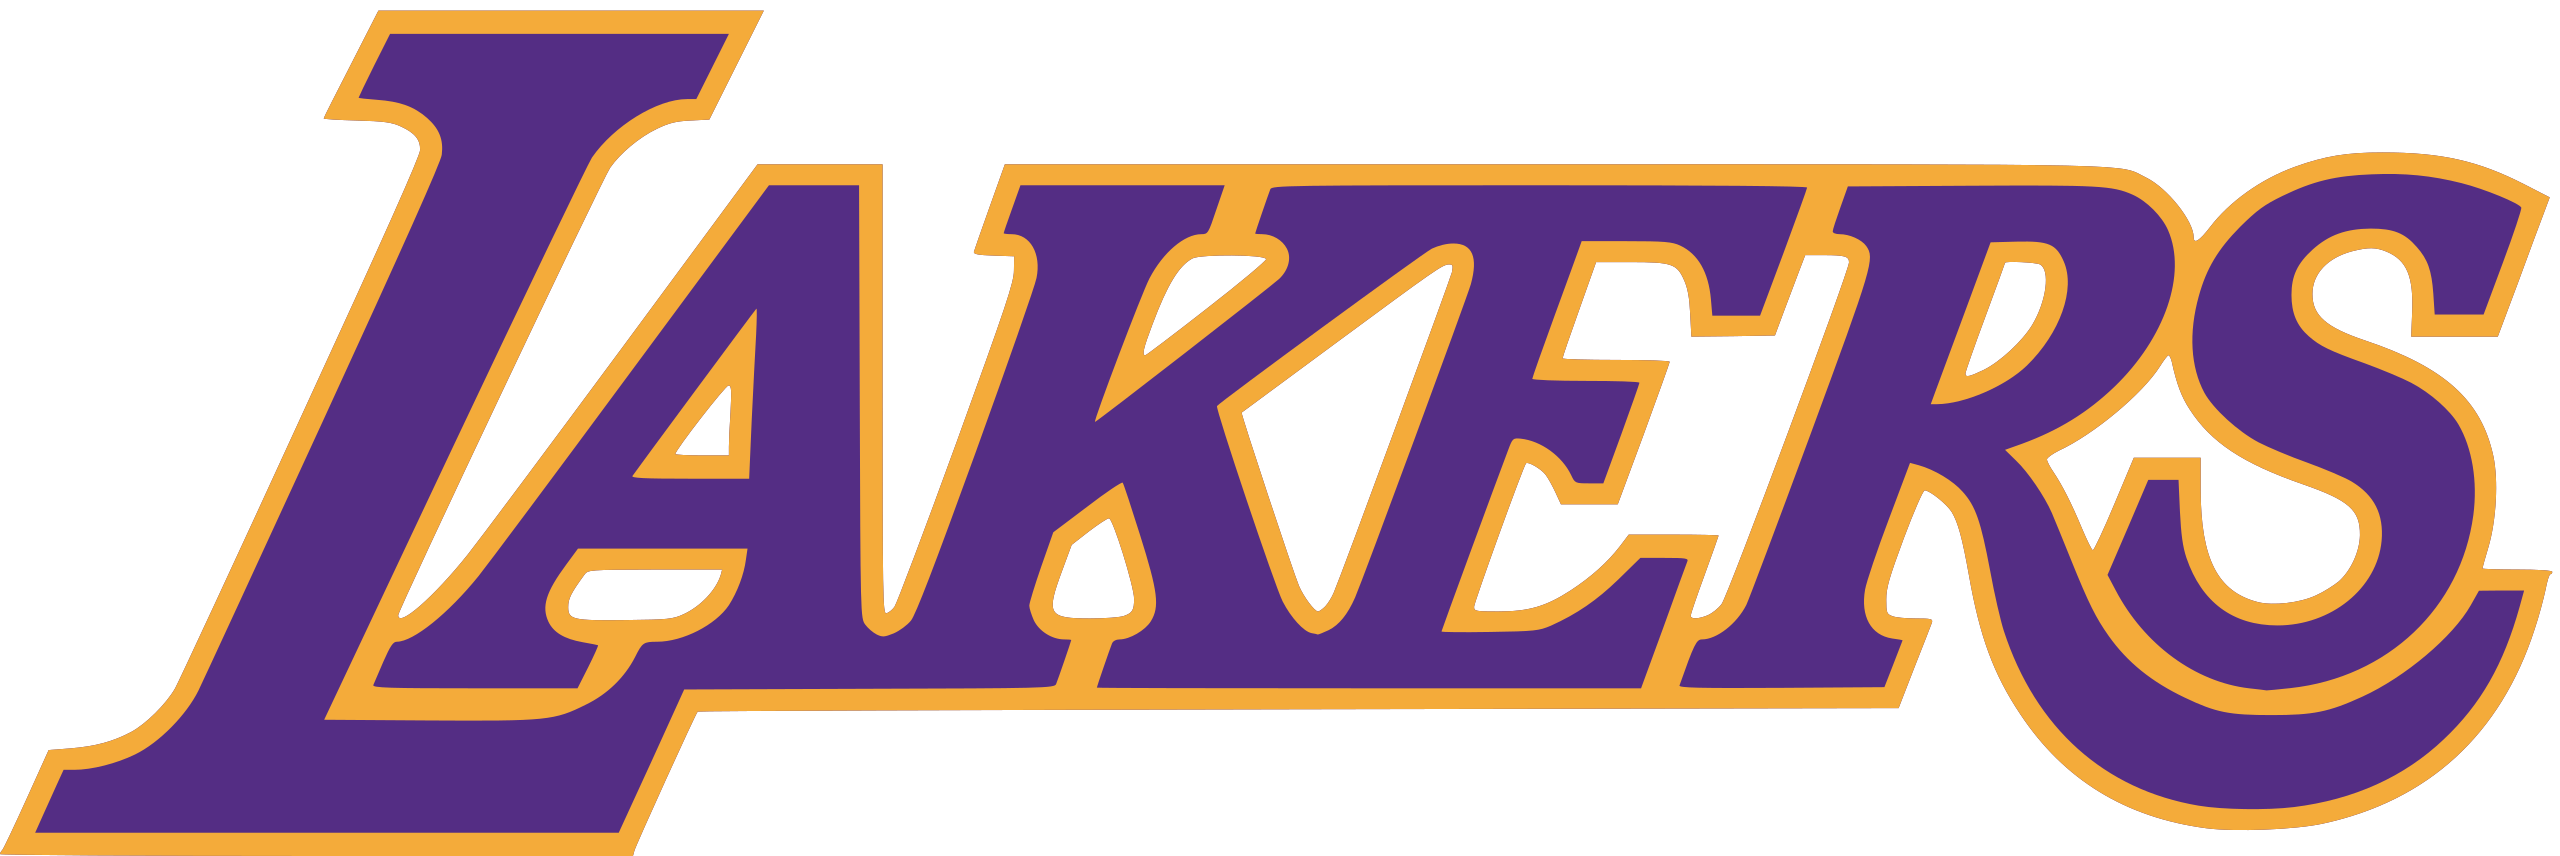 File:Los Angeles Lakers Wordmark Logo 2001-Current.Svg - Wikipedia